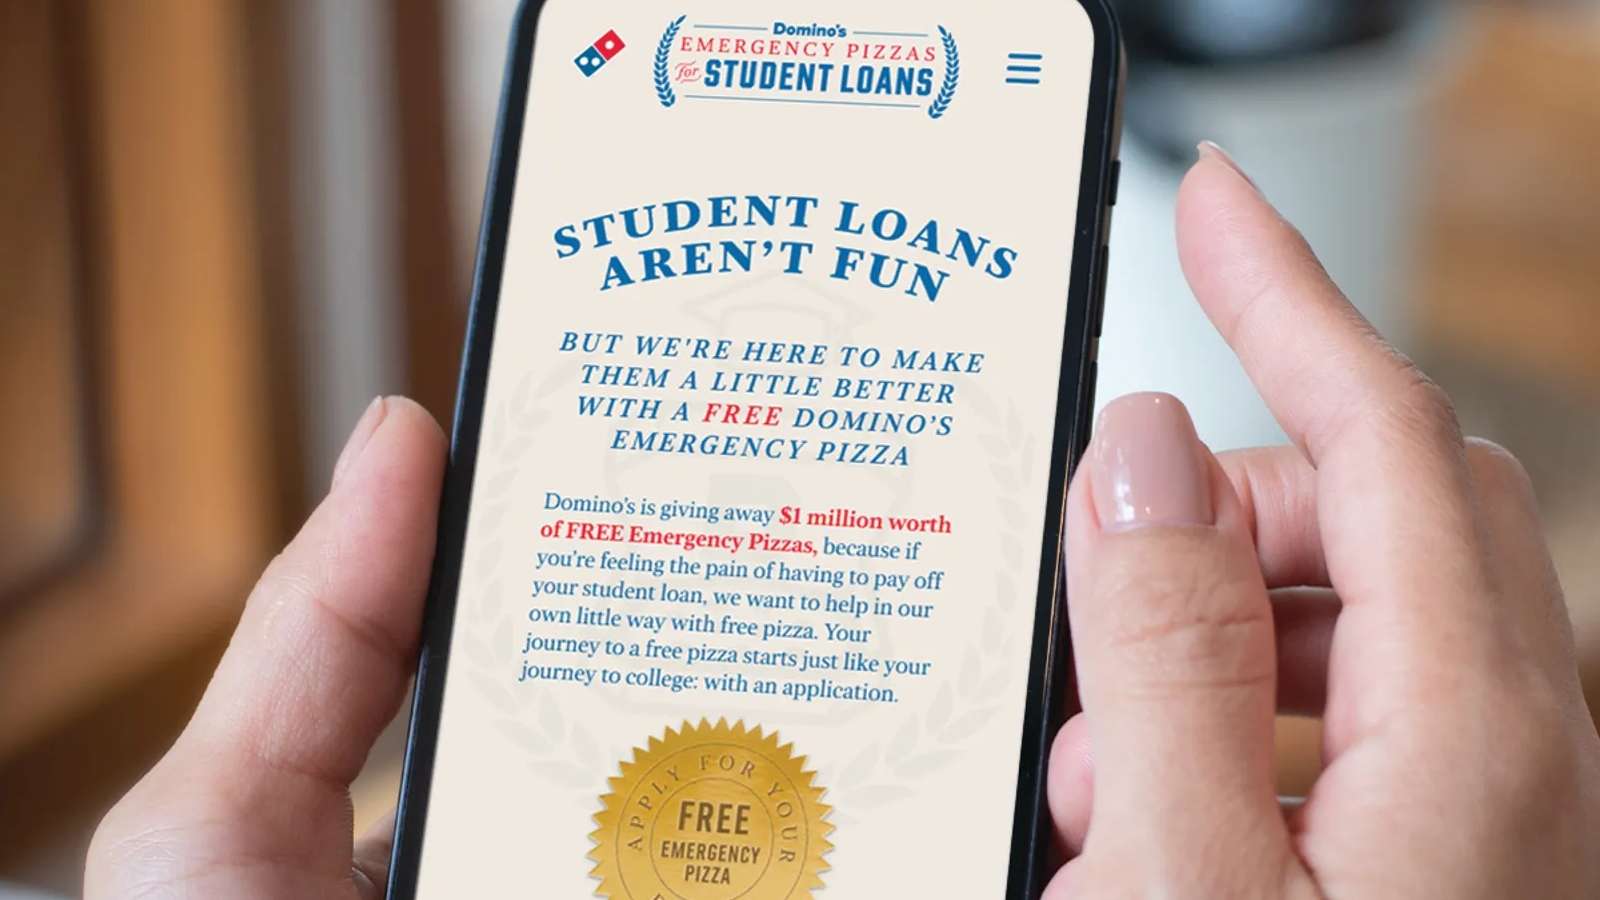 Image shows Domino's app, which features a free pizza deal for those with student loans